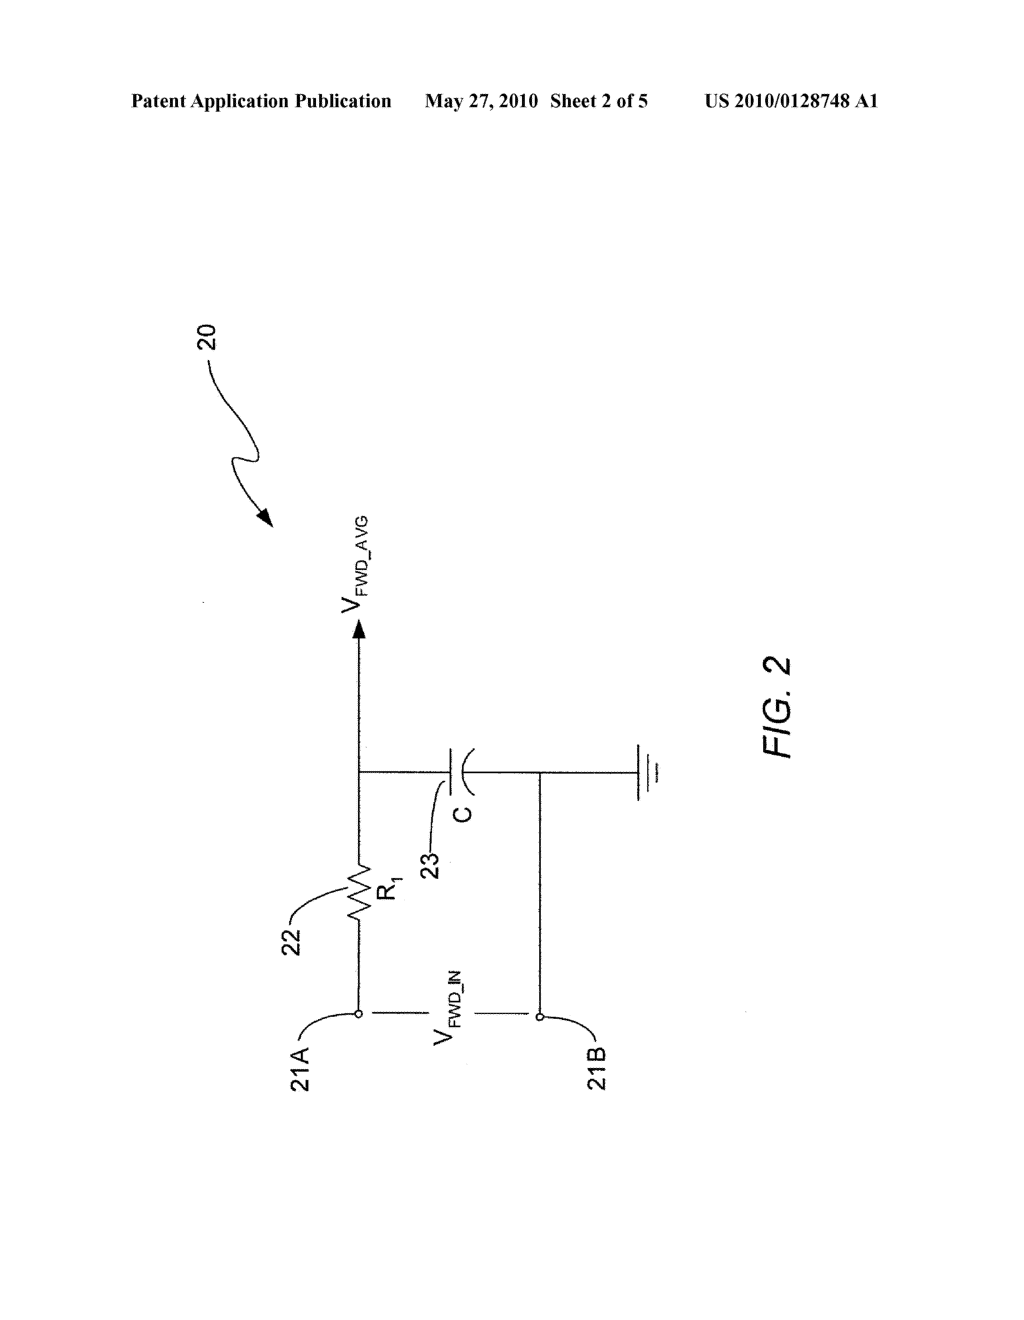 MONITORING METHOD AND DEVICE FOR MONITORING A FORWARD VOLTAGE OF A LASER DIODE IN A LASER DIODE DRIVER INTEGRATED CIRCUIT (IC) - diagram, schematic, and image 03